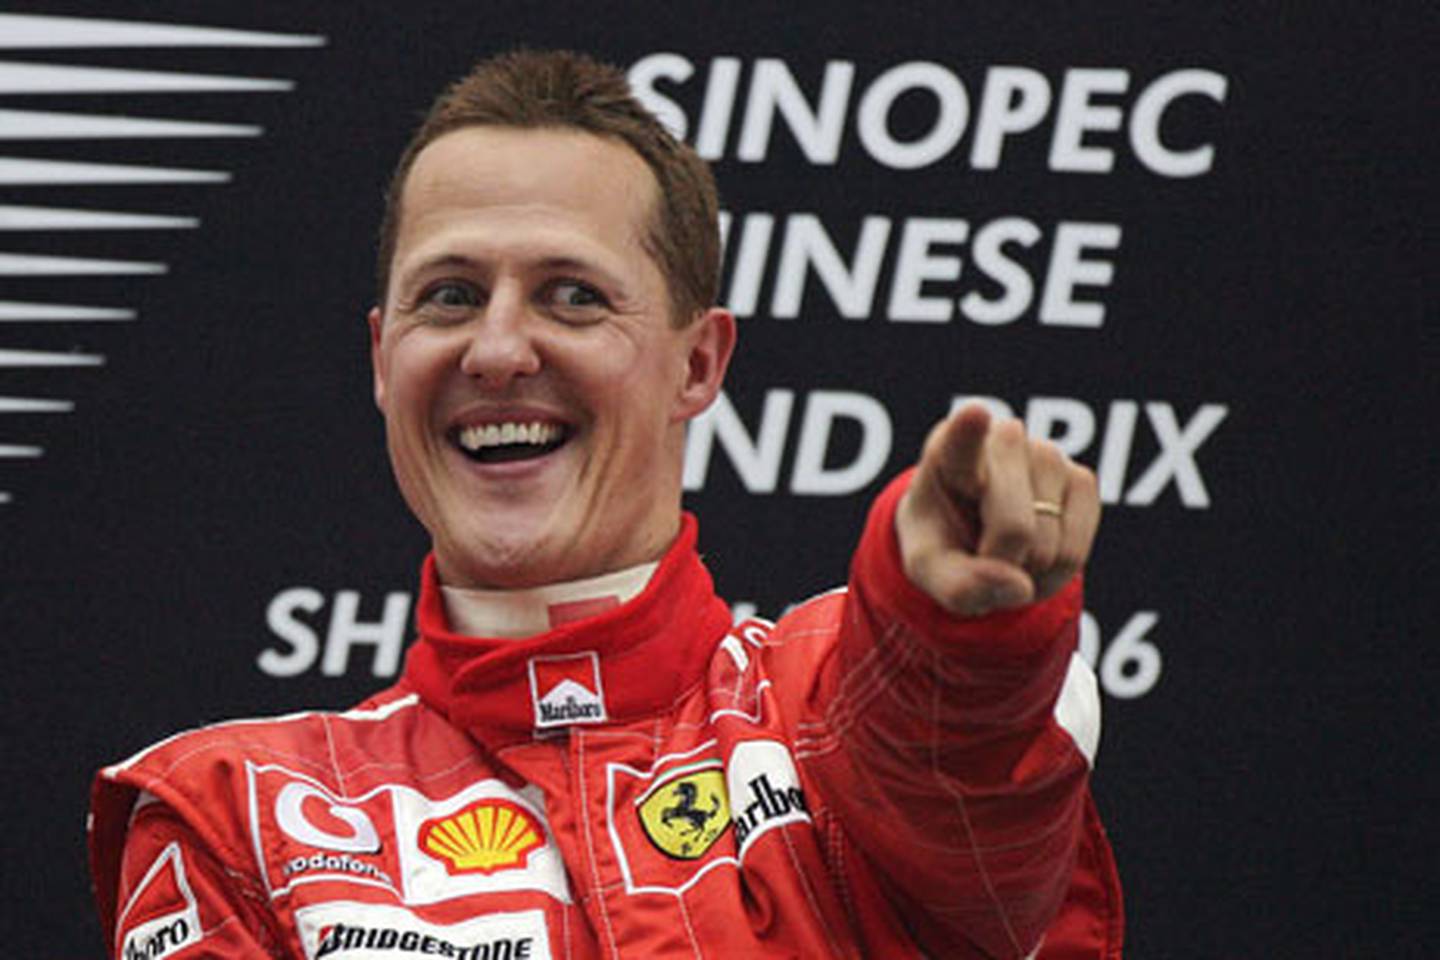 Schumacher is the joint record World Championship winner, winning seven F1 seasons. Sir Lewis Hamiltion has the same number of titles. Photo: Guenter Schiffmann / ASA / Bloomberg News